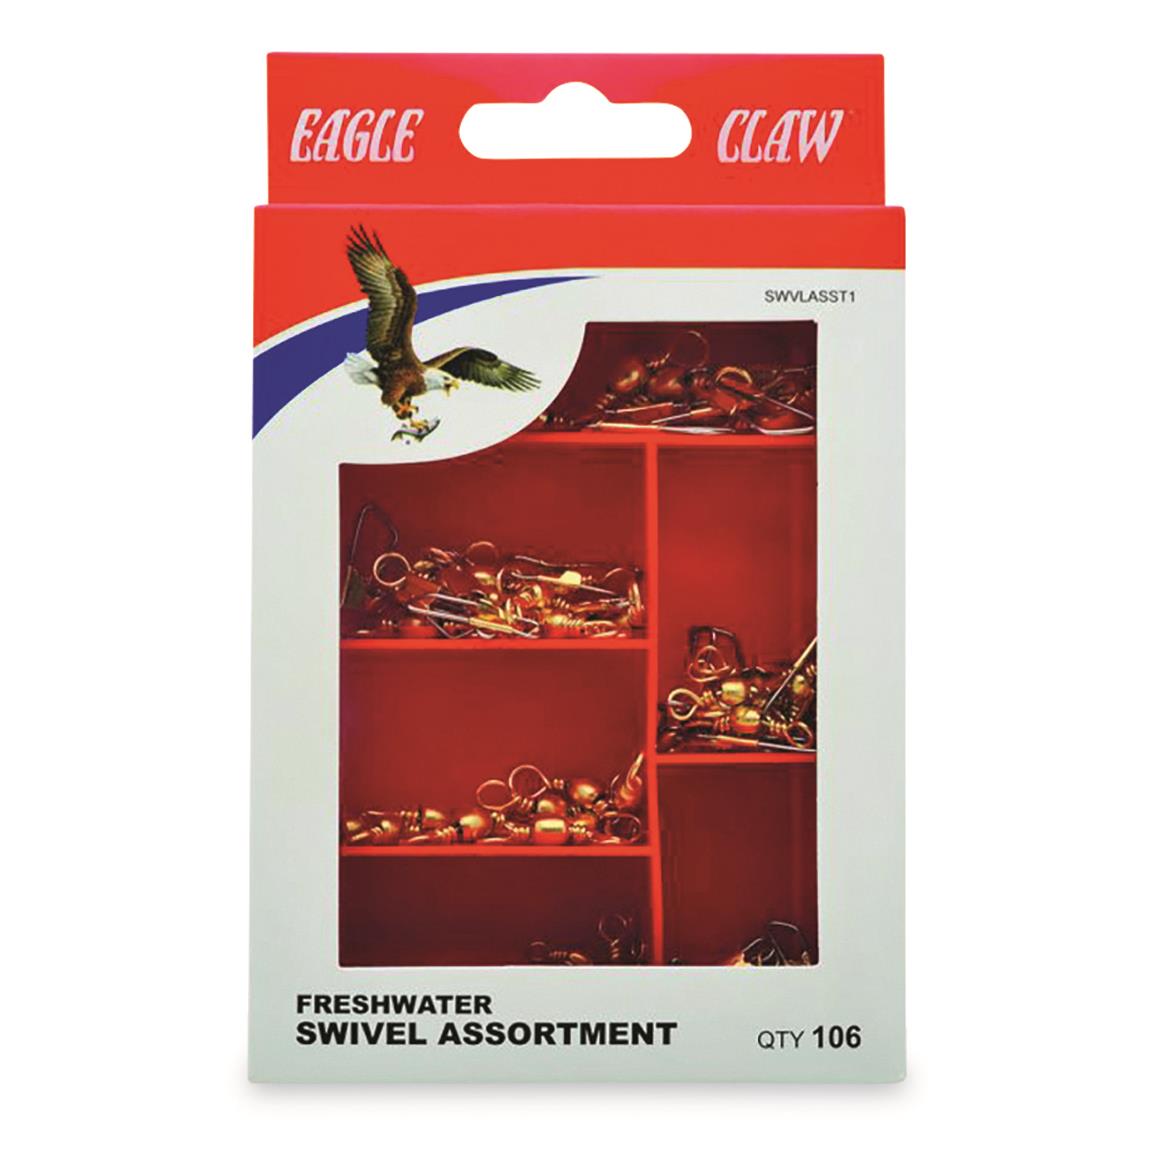 Eagle Claw Freshwater Swivel Assortment Kit, 106 Pieces